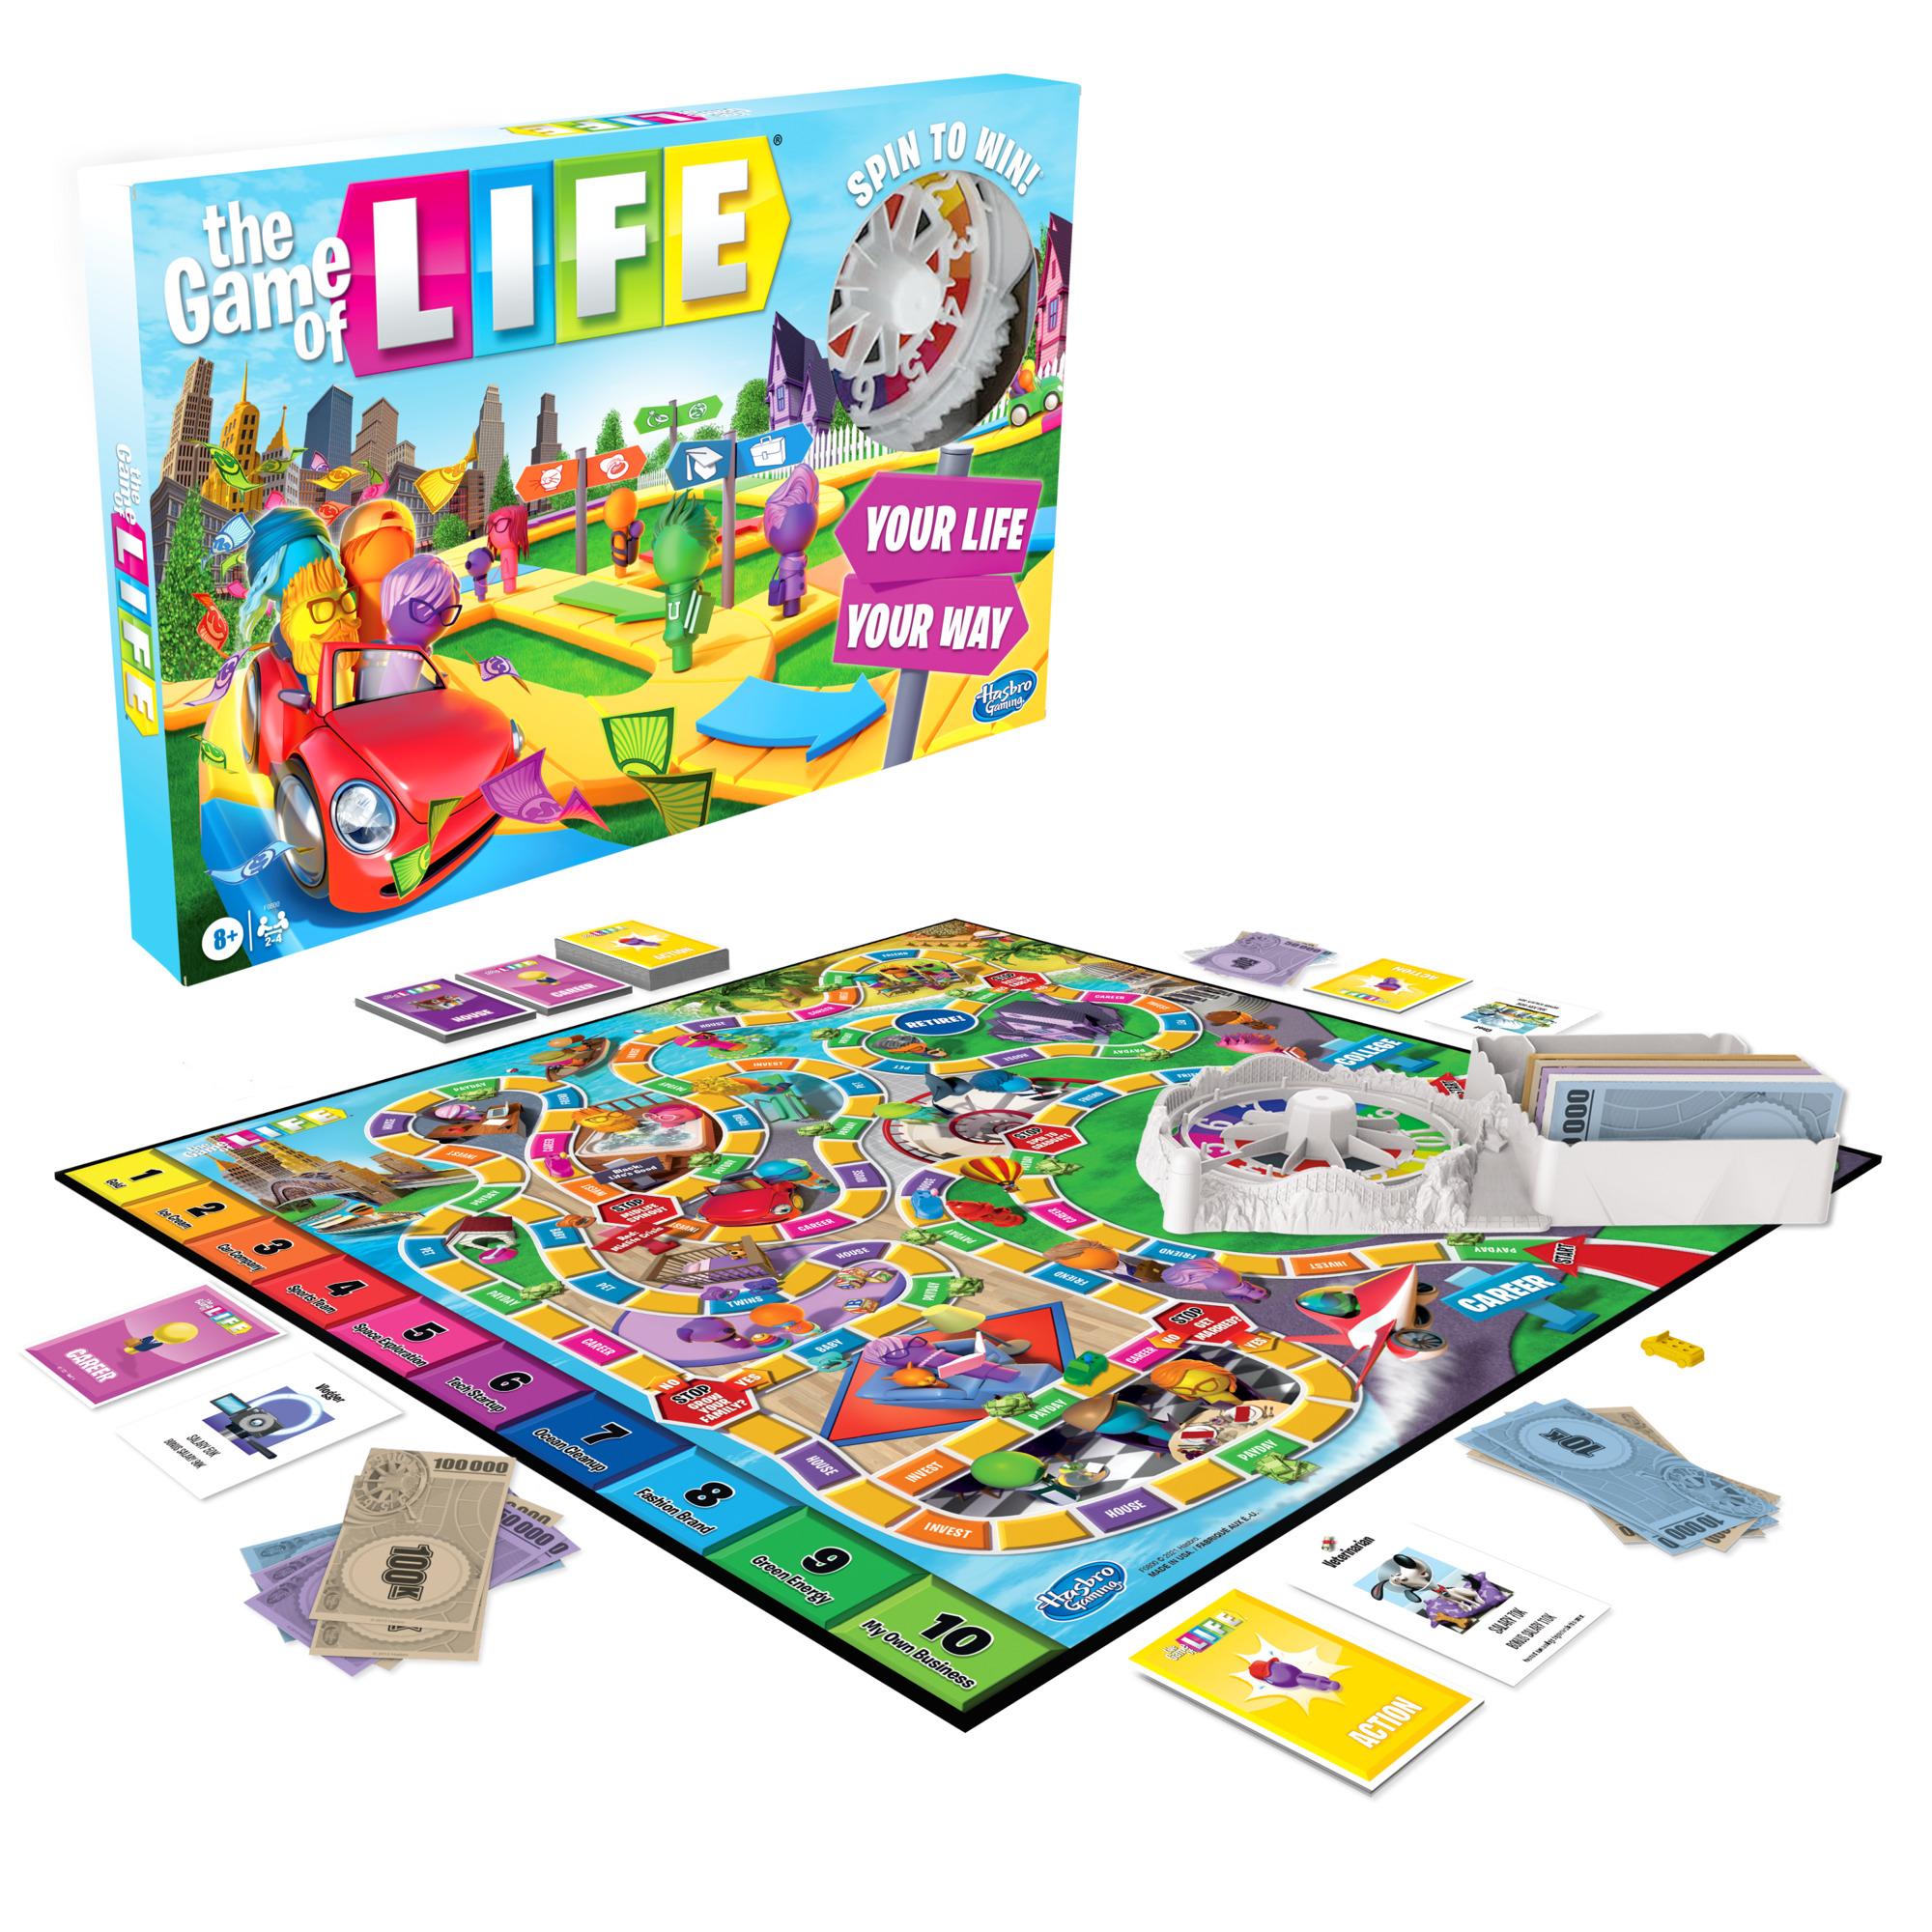 NEW The Game of Life Traditional Board Game Fun Family Game Party Game 